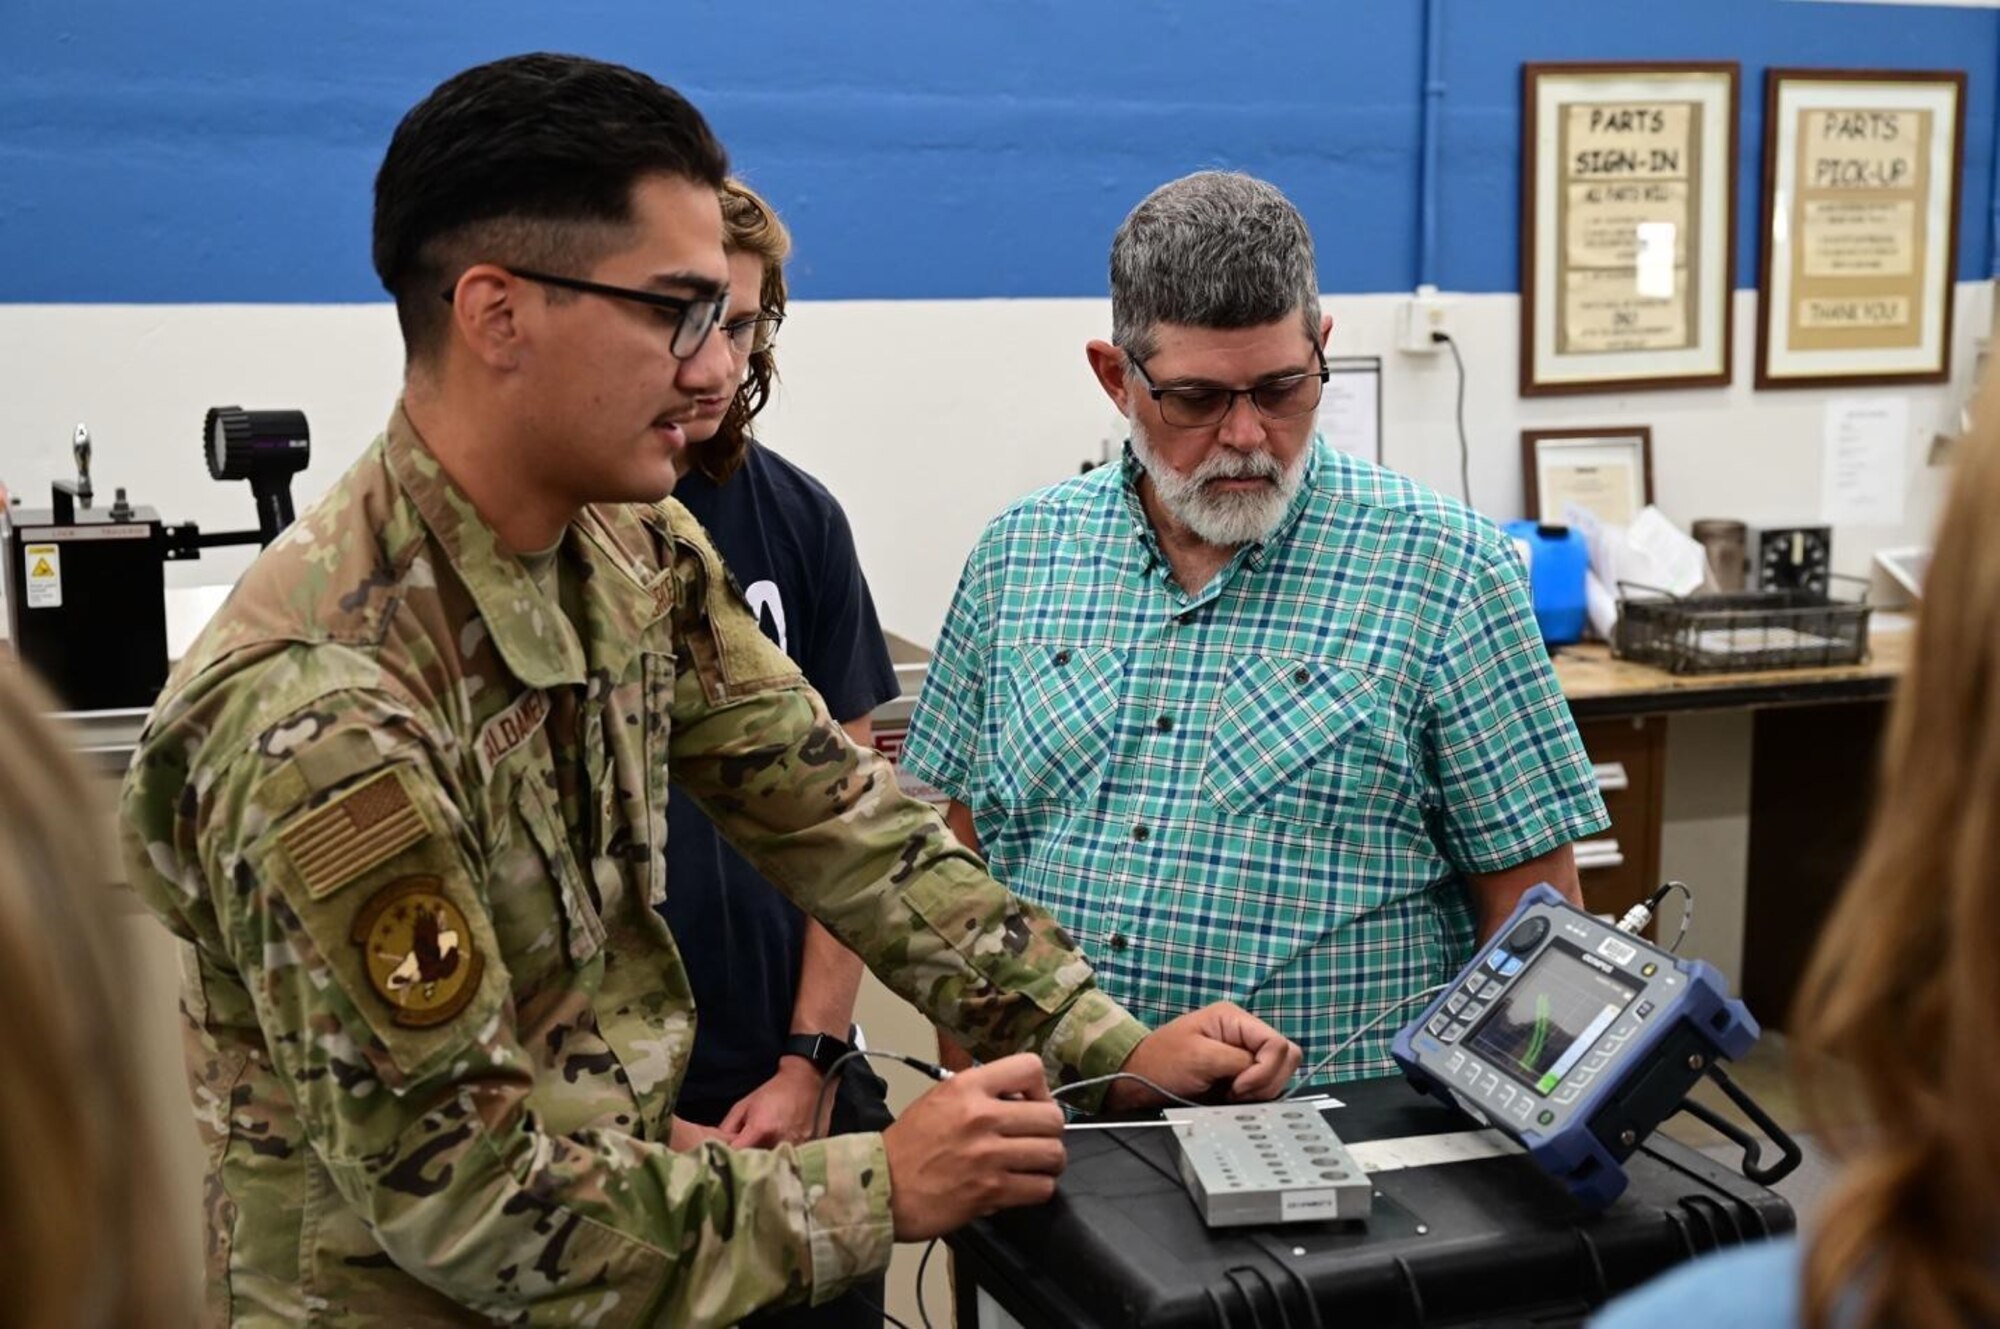 Marvin Pepper and his family are given a tour of the Non-Destructive Inspection laboratory by Airman 1st Class Melvin Gondalez, a 28th Maintenance Squadron Fabrication Flight NDI apprentice, at Ellsworth Air Force Base, S.D., July 13, 2022.